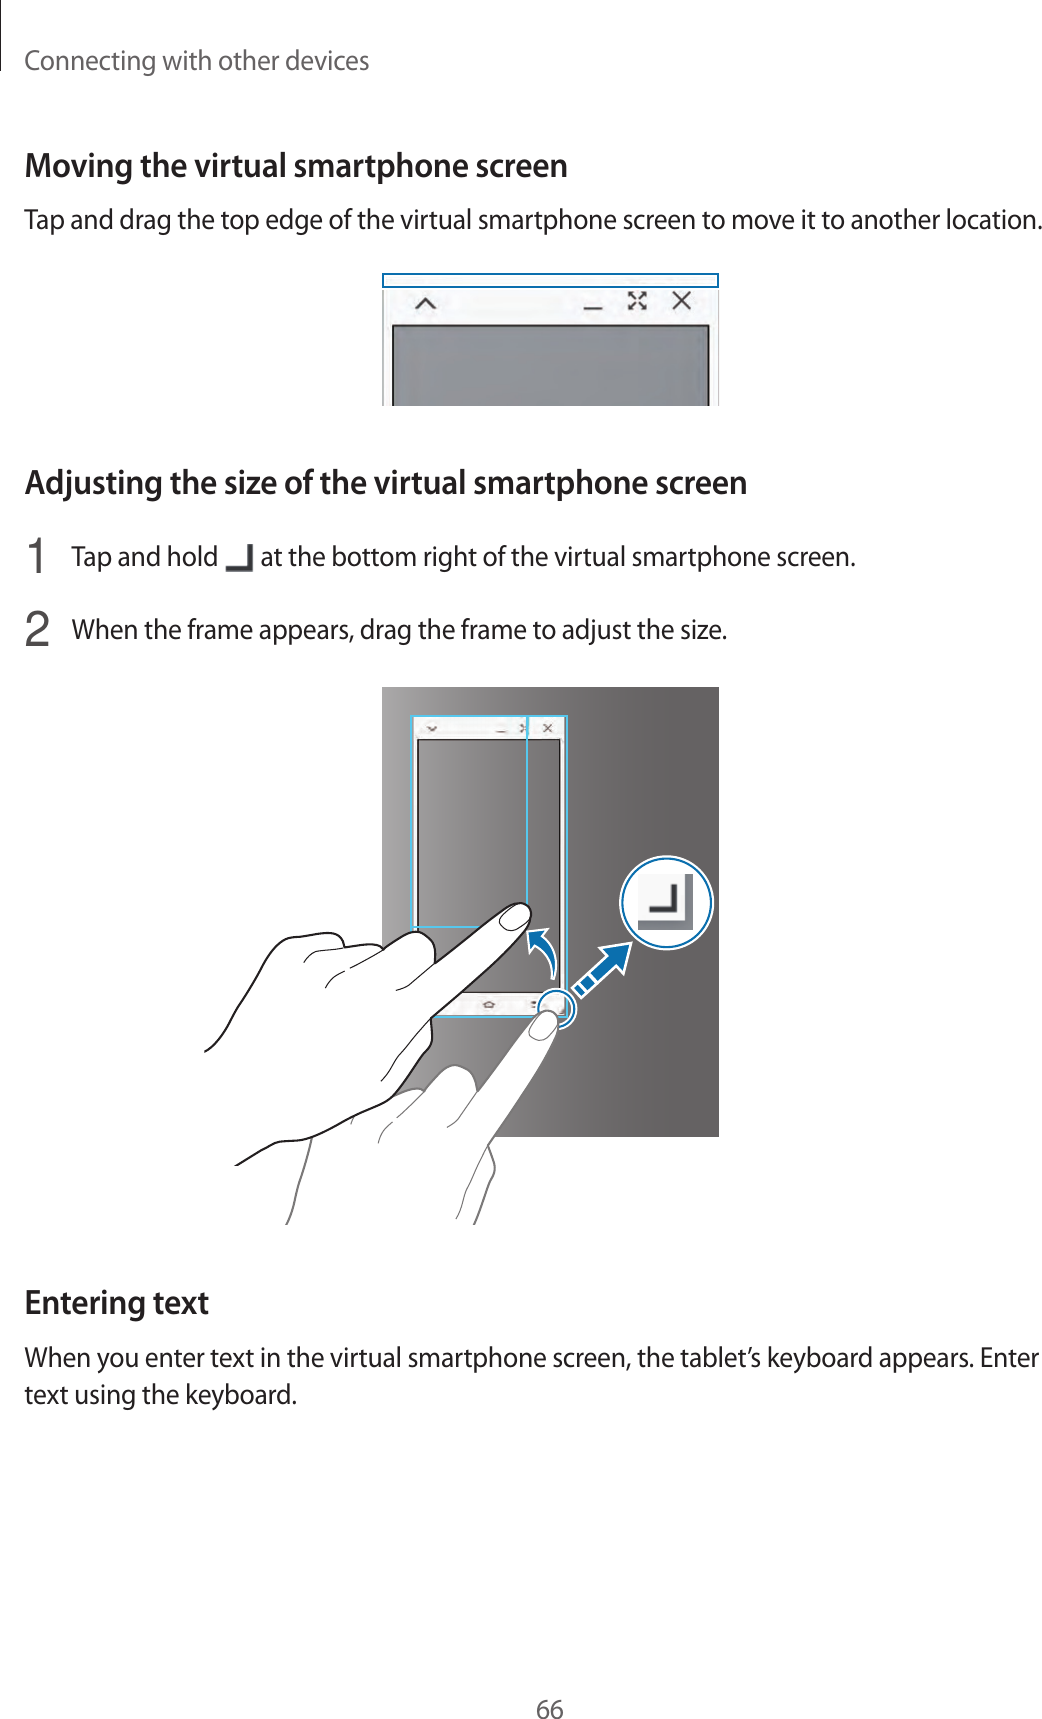 Connecting with other devices66Moving the virtual smartphone screenTap and drag the top edge of the virtual smartphone screen to move it to another location.Adjusting the size of the virtual smartphone screen1  Tap and hold   at the bottom right of the virtual smartphone screen.2  When the frame appears, drag the frame to adjust the size.  Entering textWhen you enter text in the virtual smartphone screen, the tablet’s keyboard appears. Enter text using the keyboard.